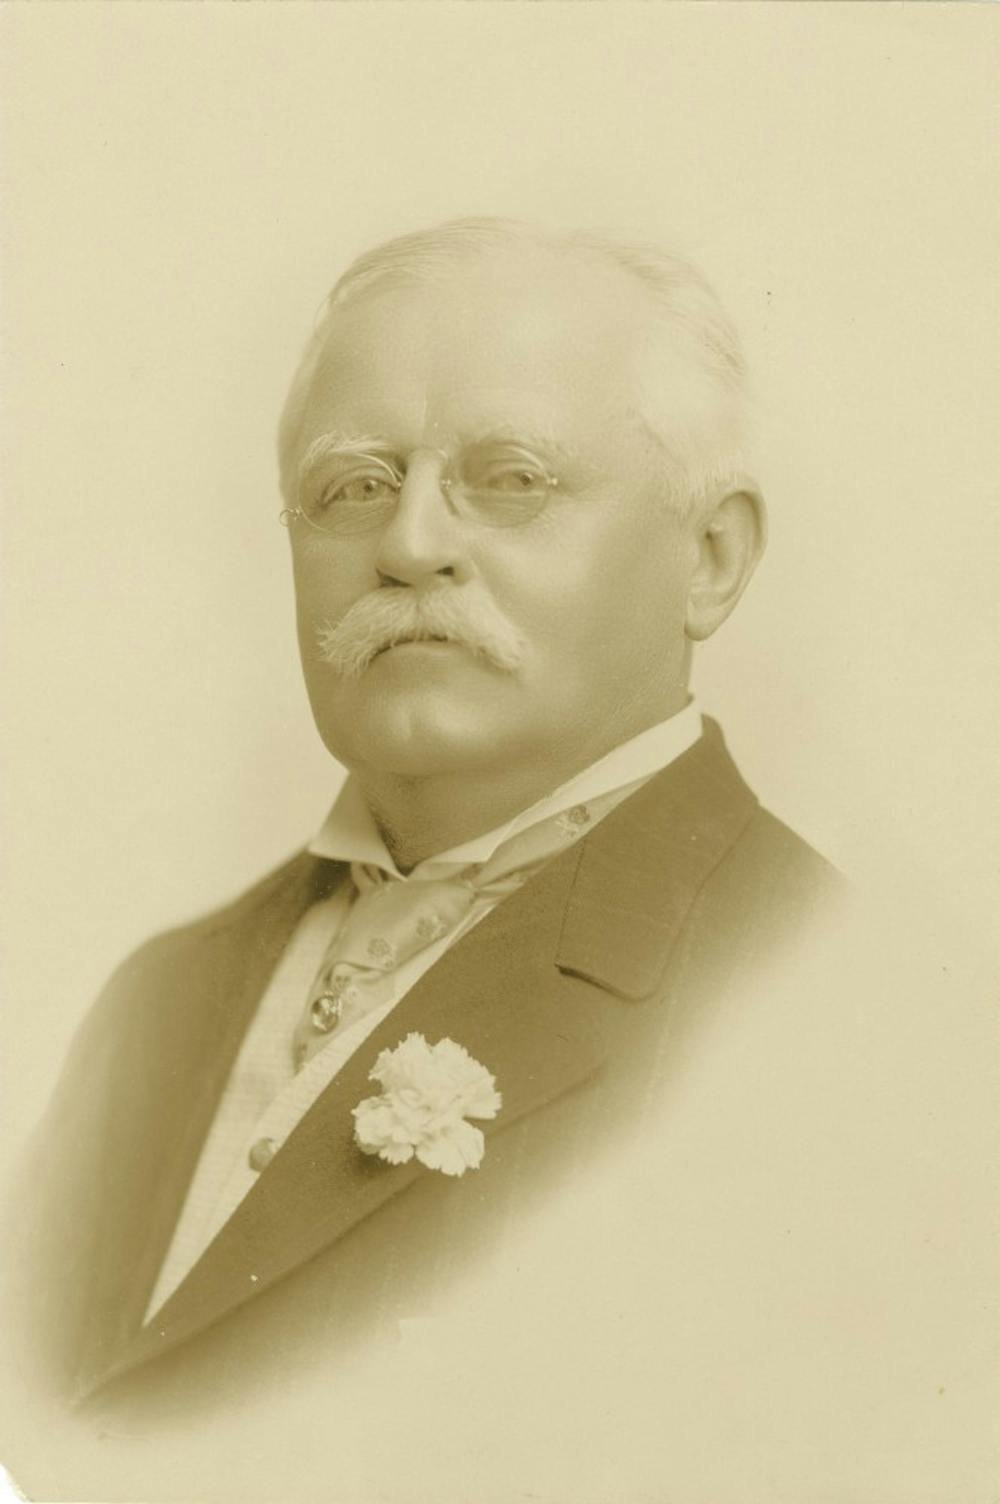 <p>Julian Shakespeare Carr, 1845-1924, <a href="https://dc.lib.unc.edu/cdm/ref/collection/vir_museum/id/669" target="_blank">North Carolina Collection Photographic Archives</a></p>